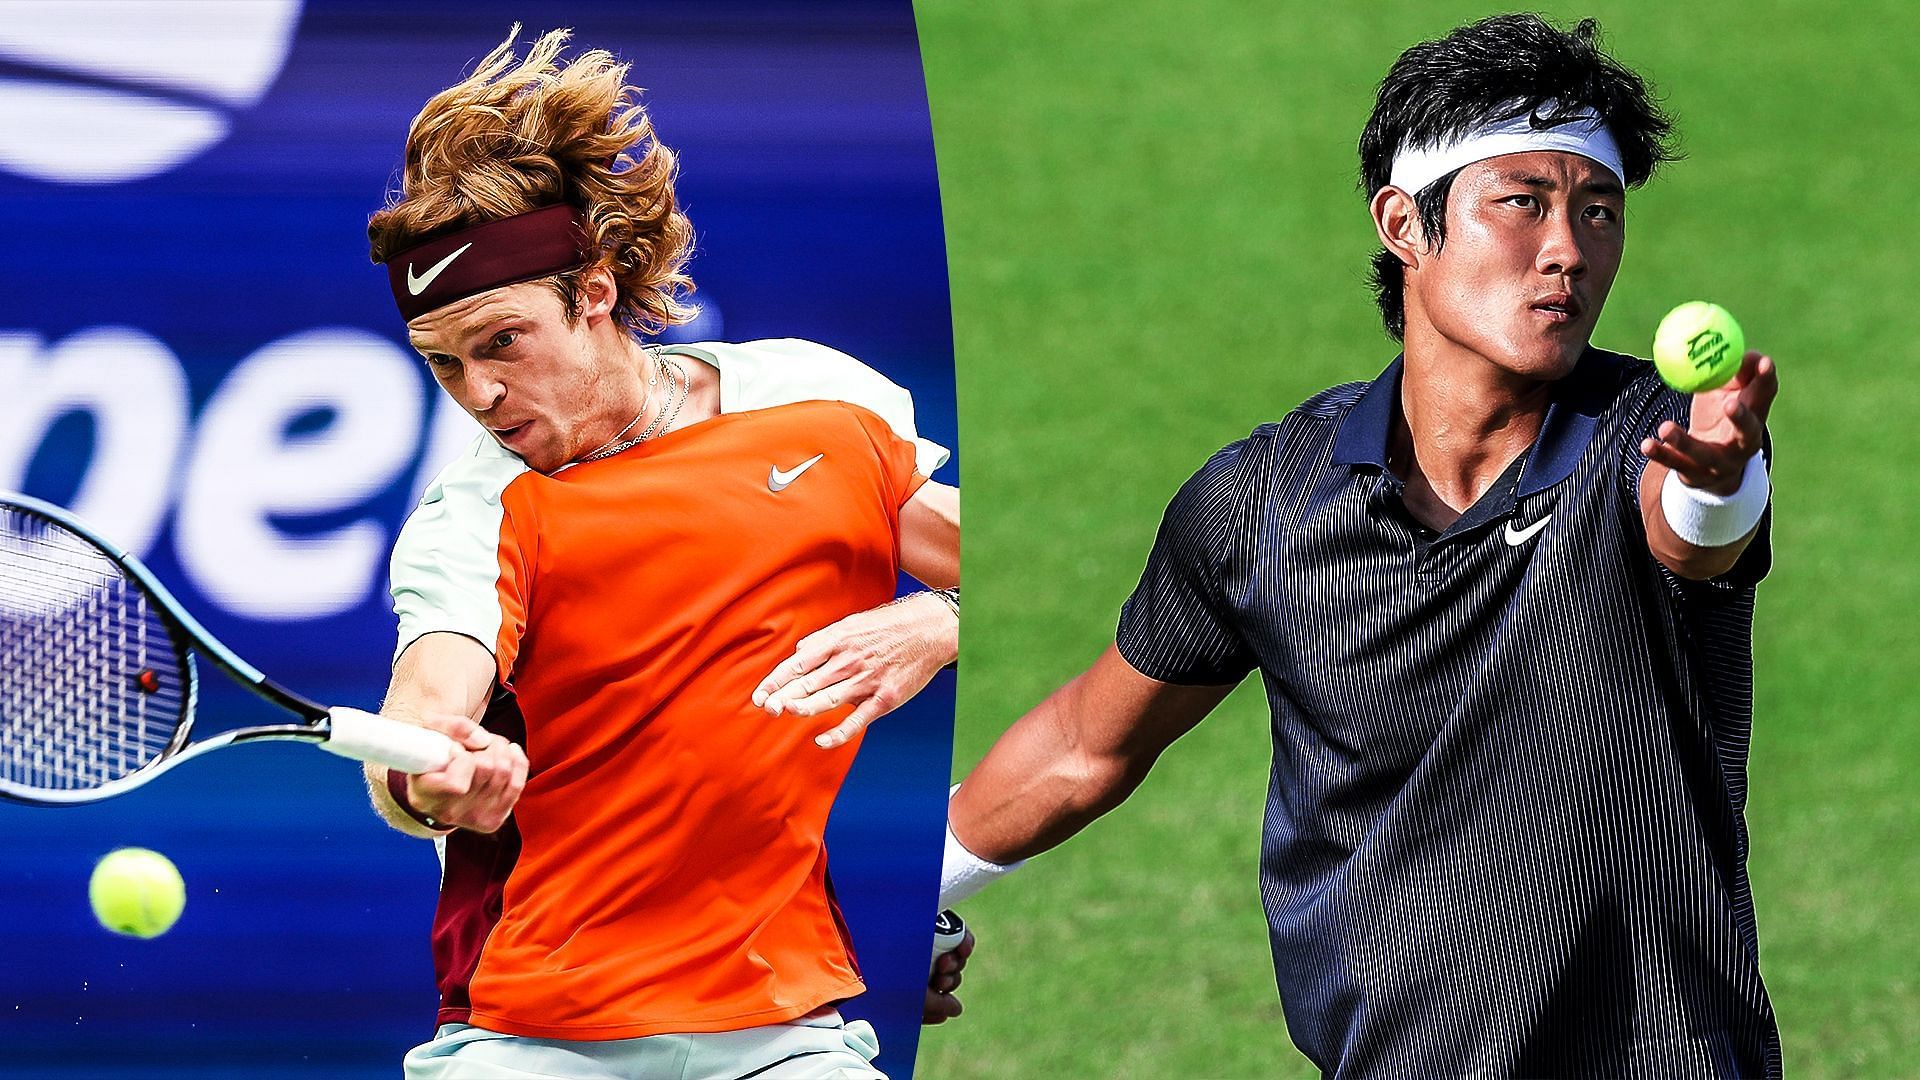 Andrey Rublev will face Zhang Zhizhen in the second round of the Astana Open